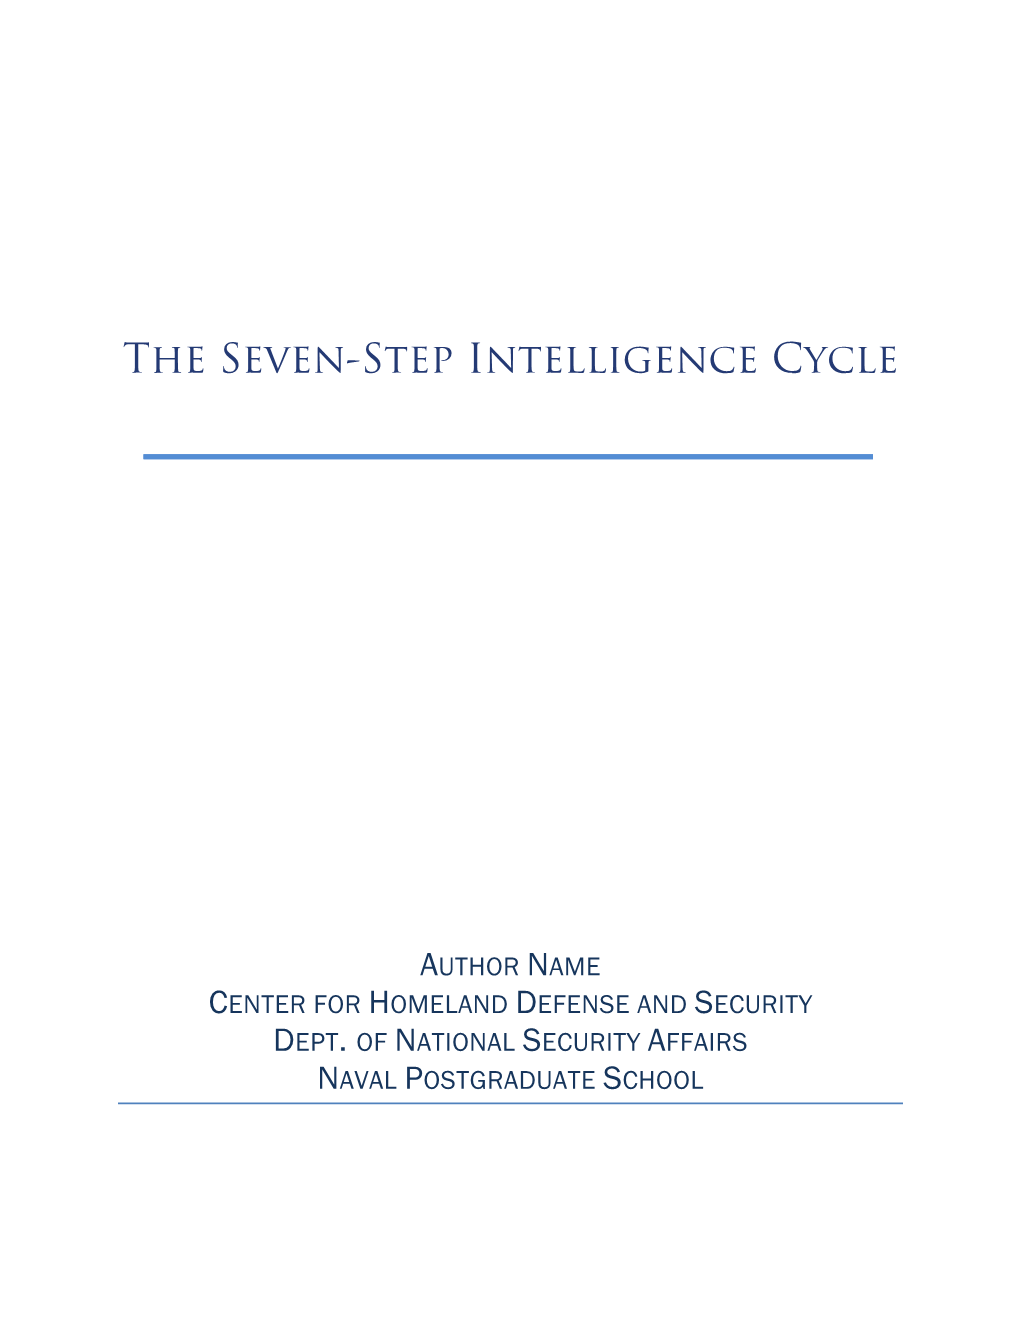 The Seven-Step Intelligence Cycle